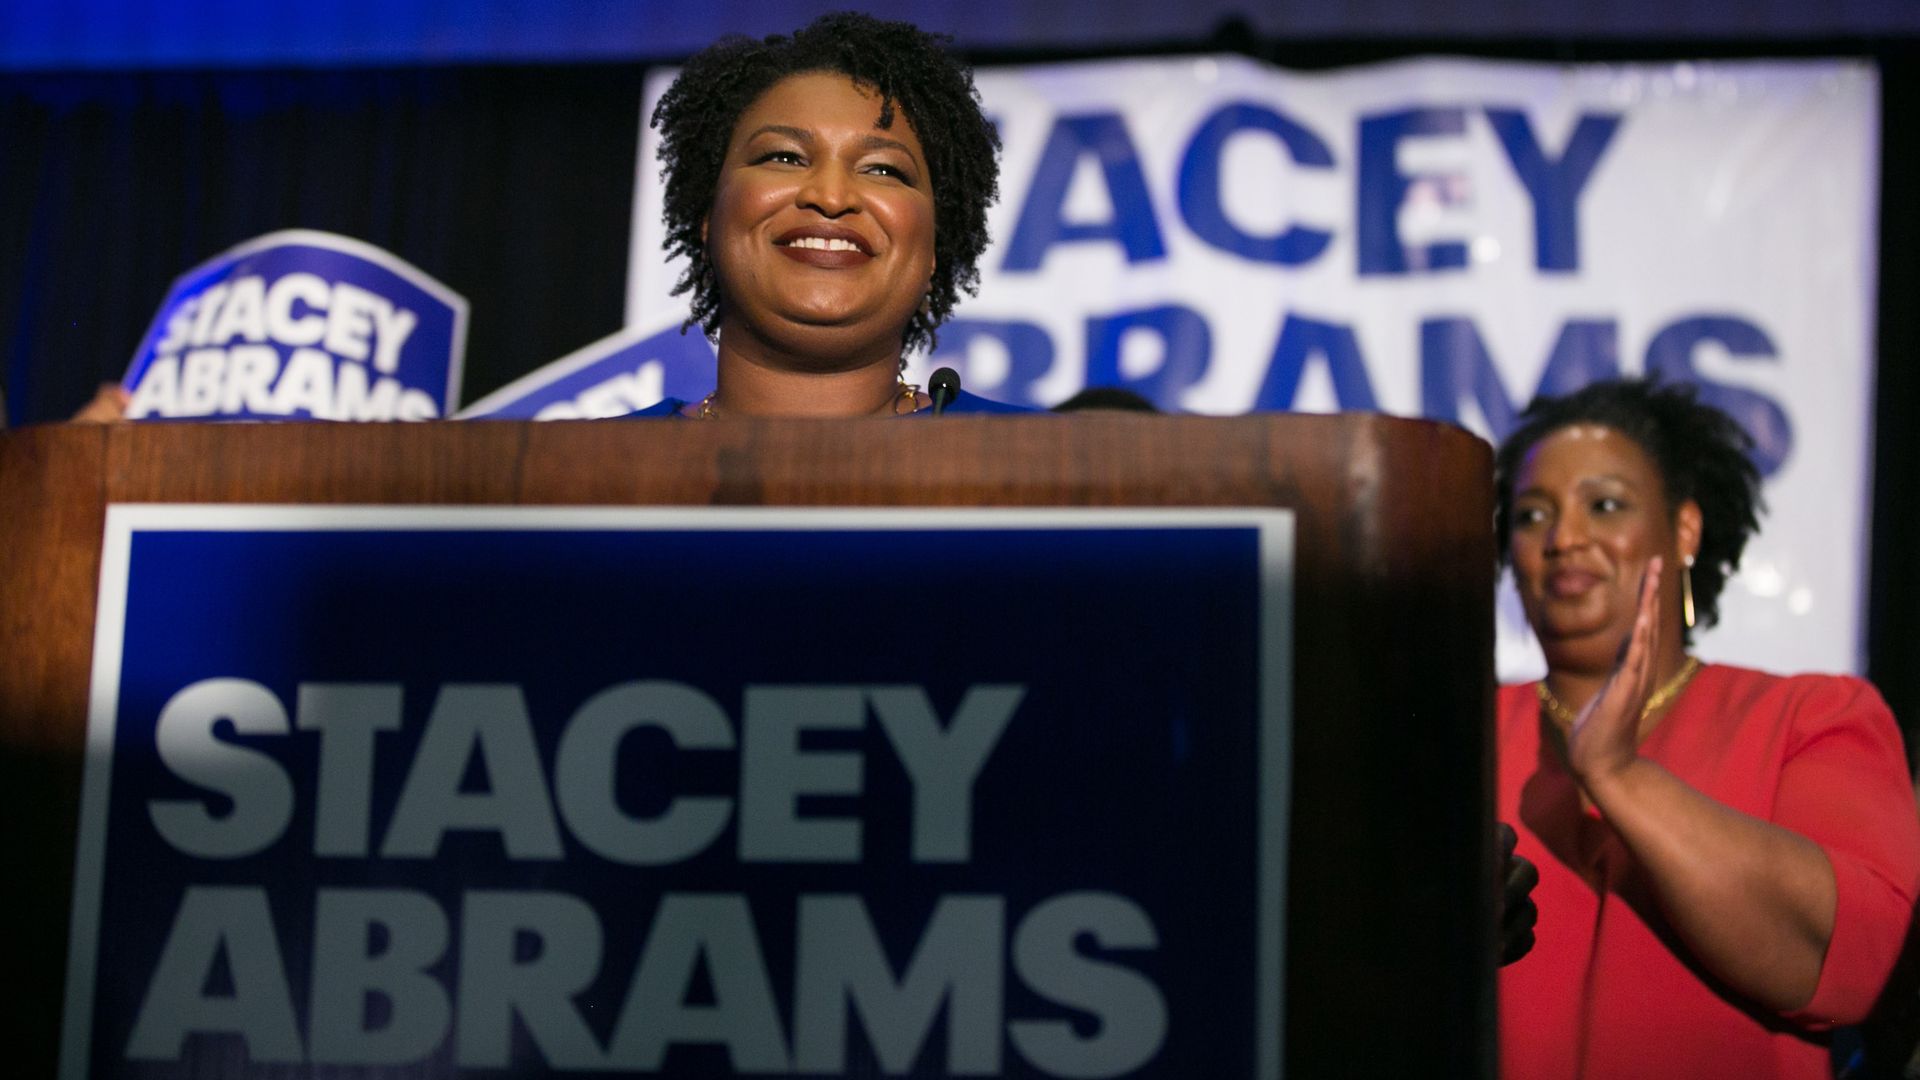 Stacey Abrams at a podium